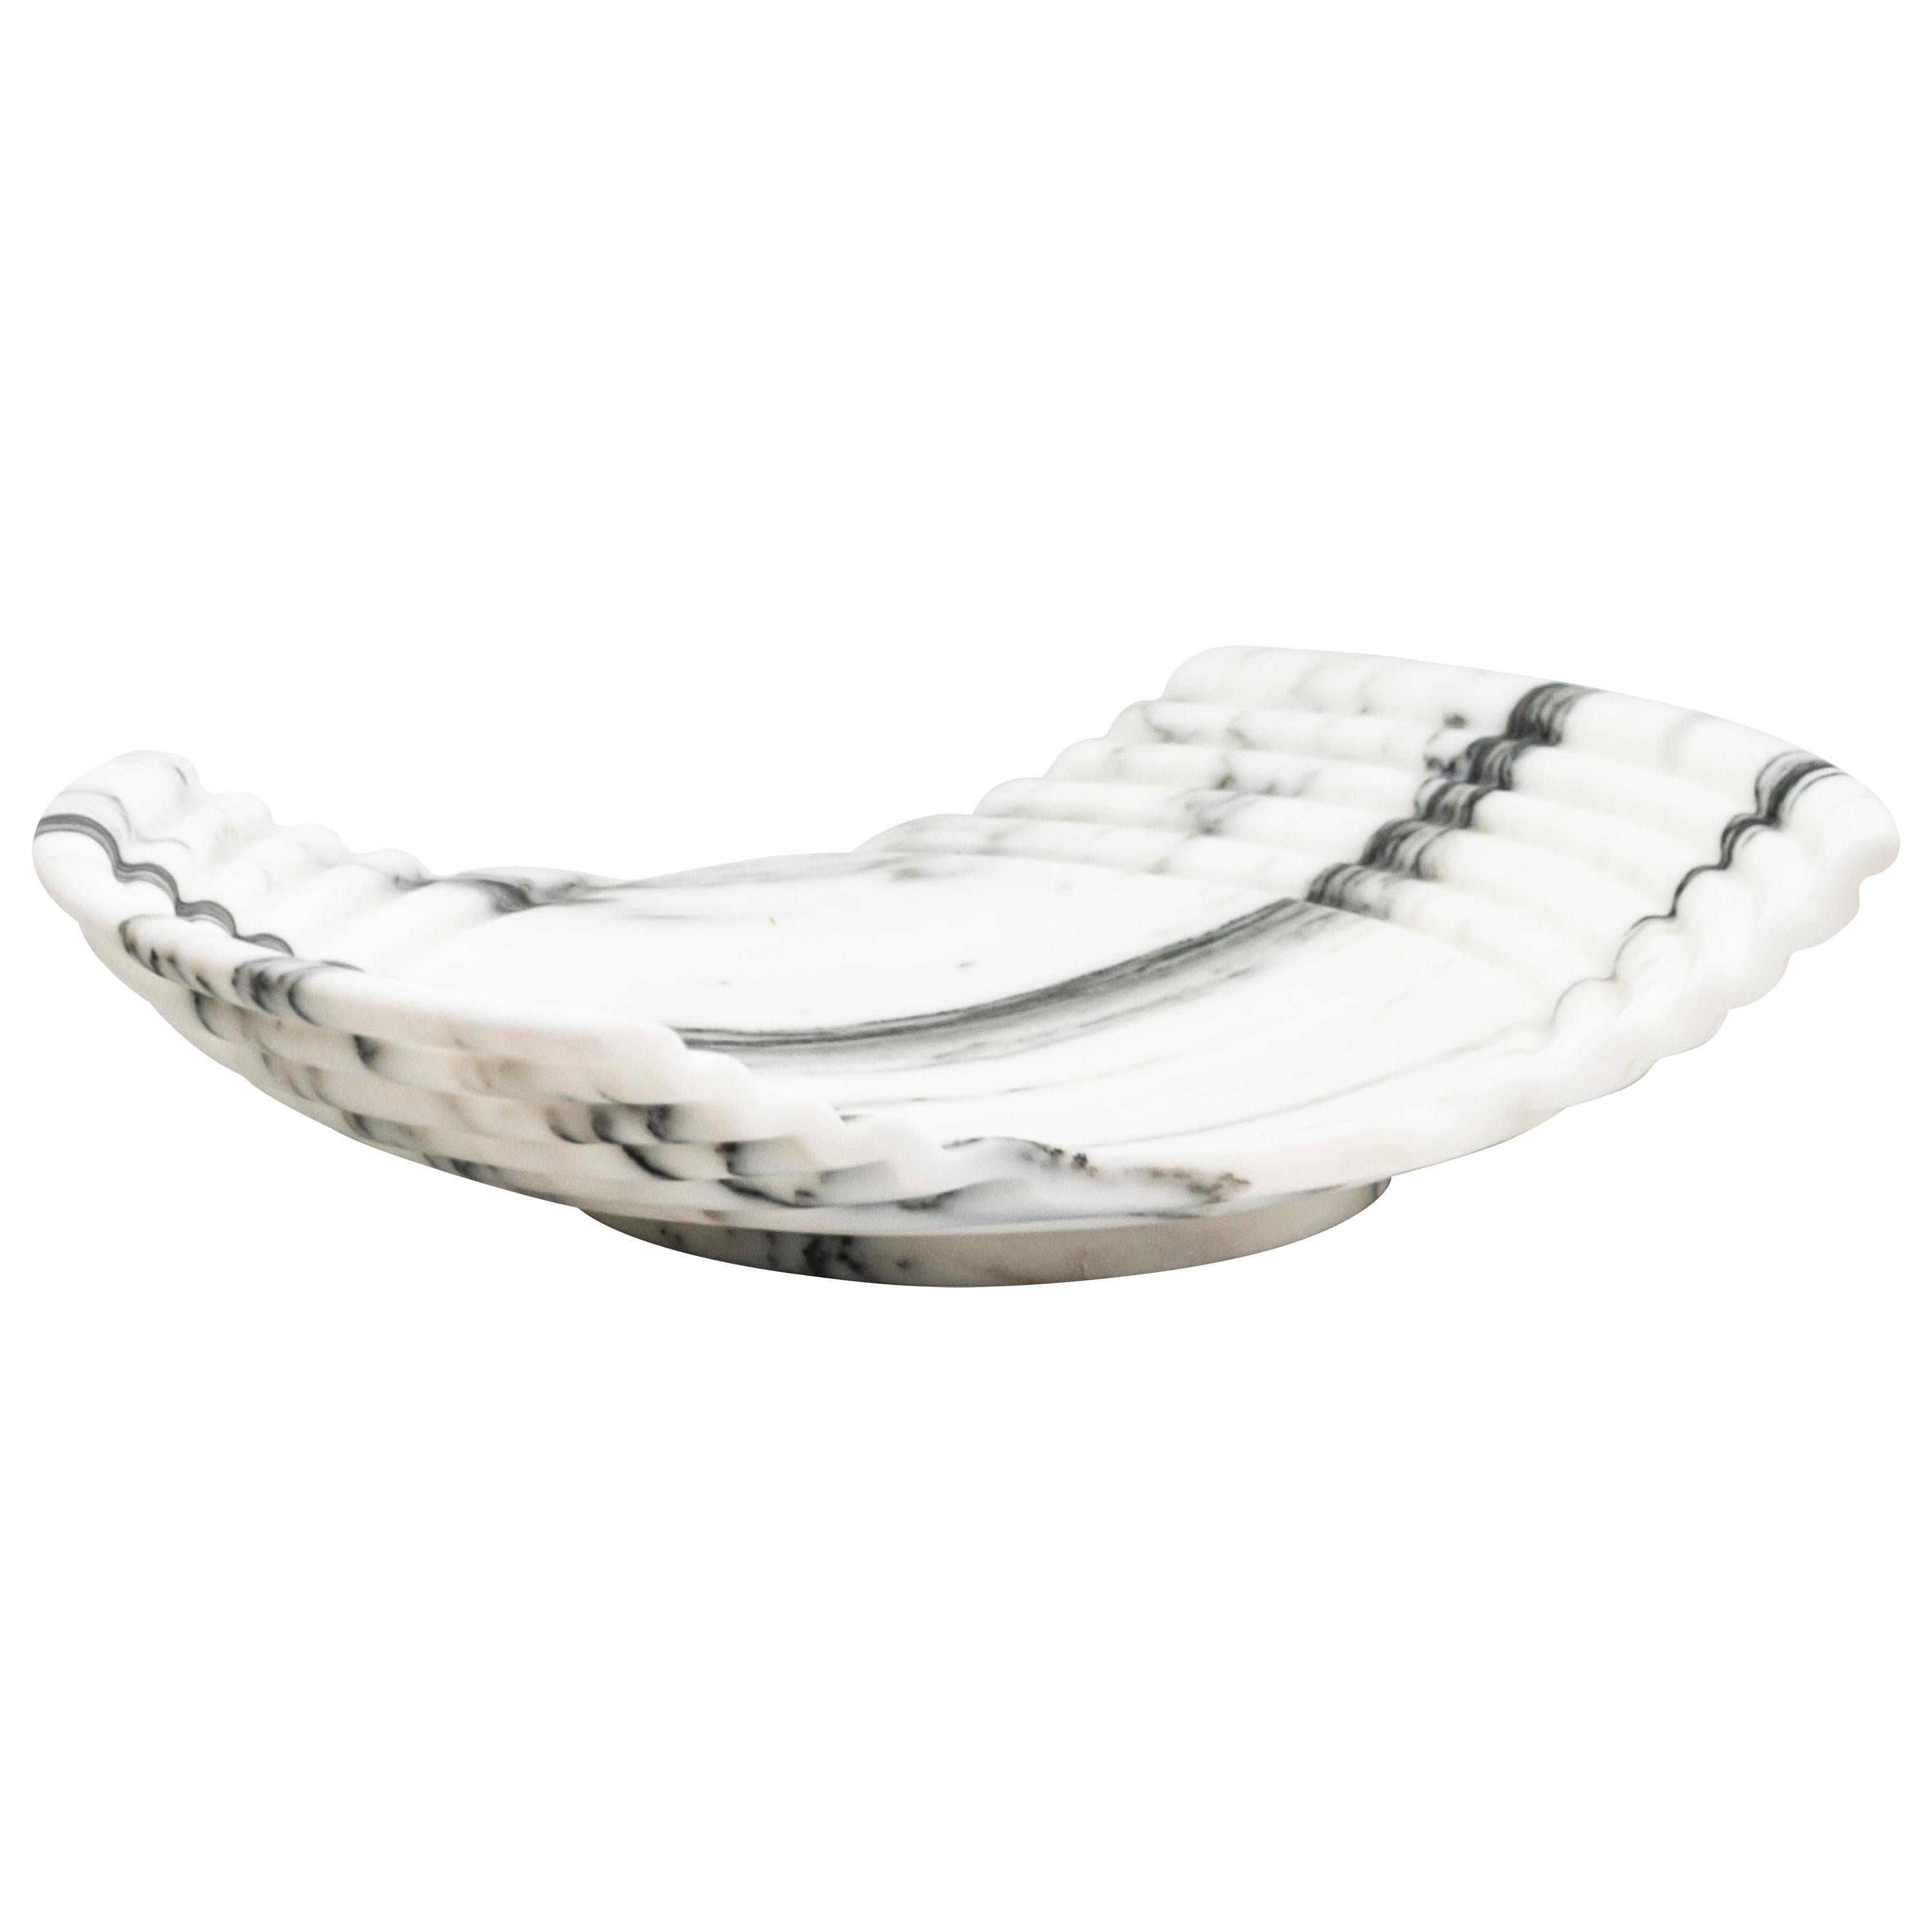 Handmade Big Striped Wave Tray in Arabescato Marble